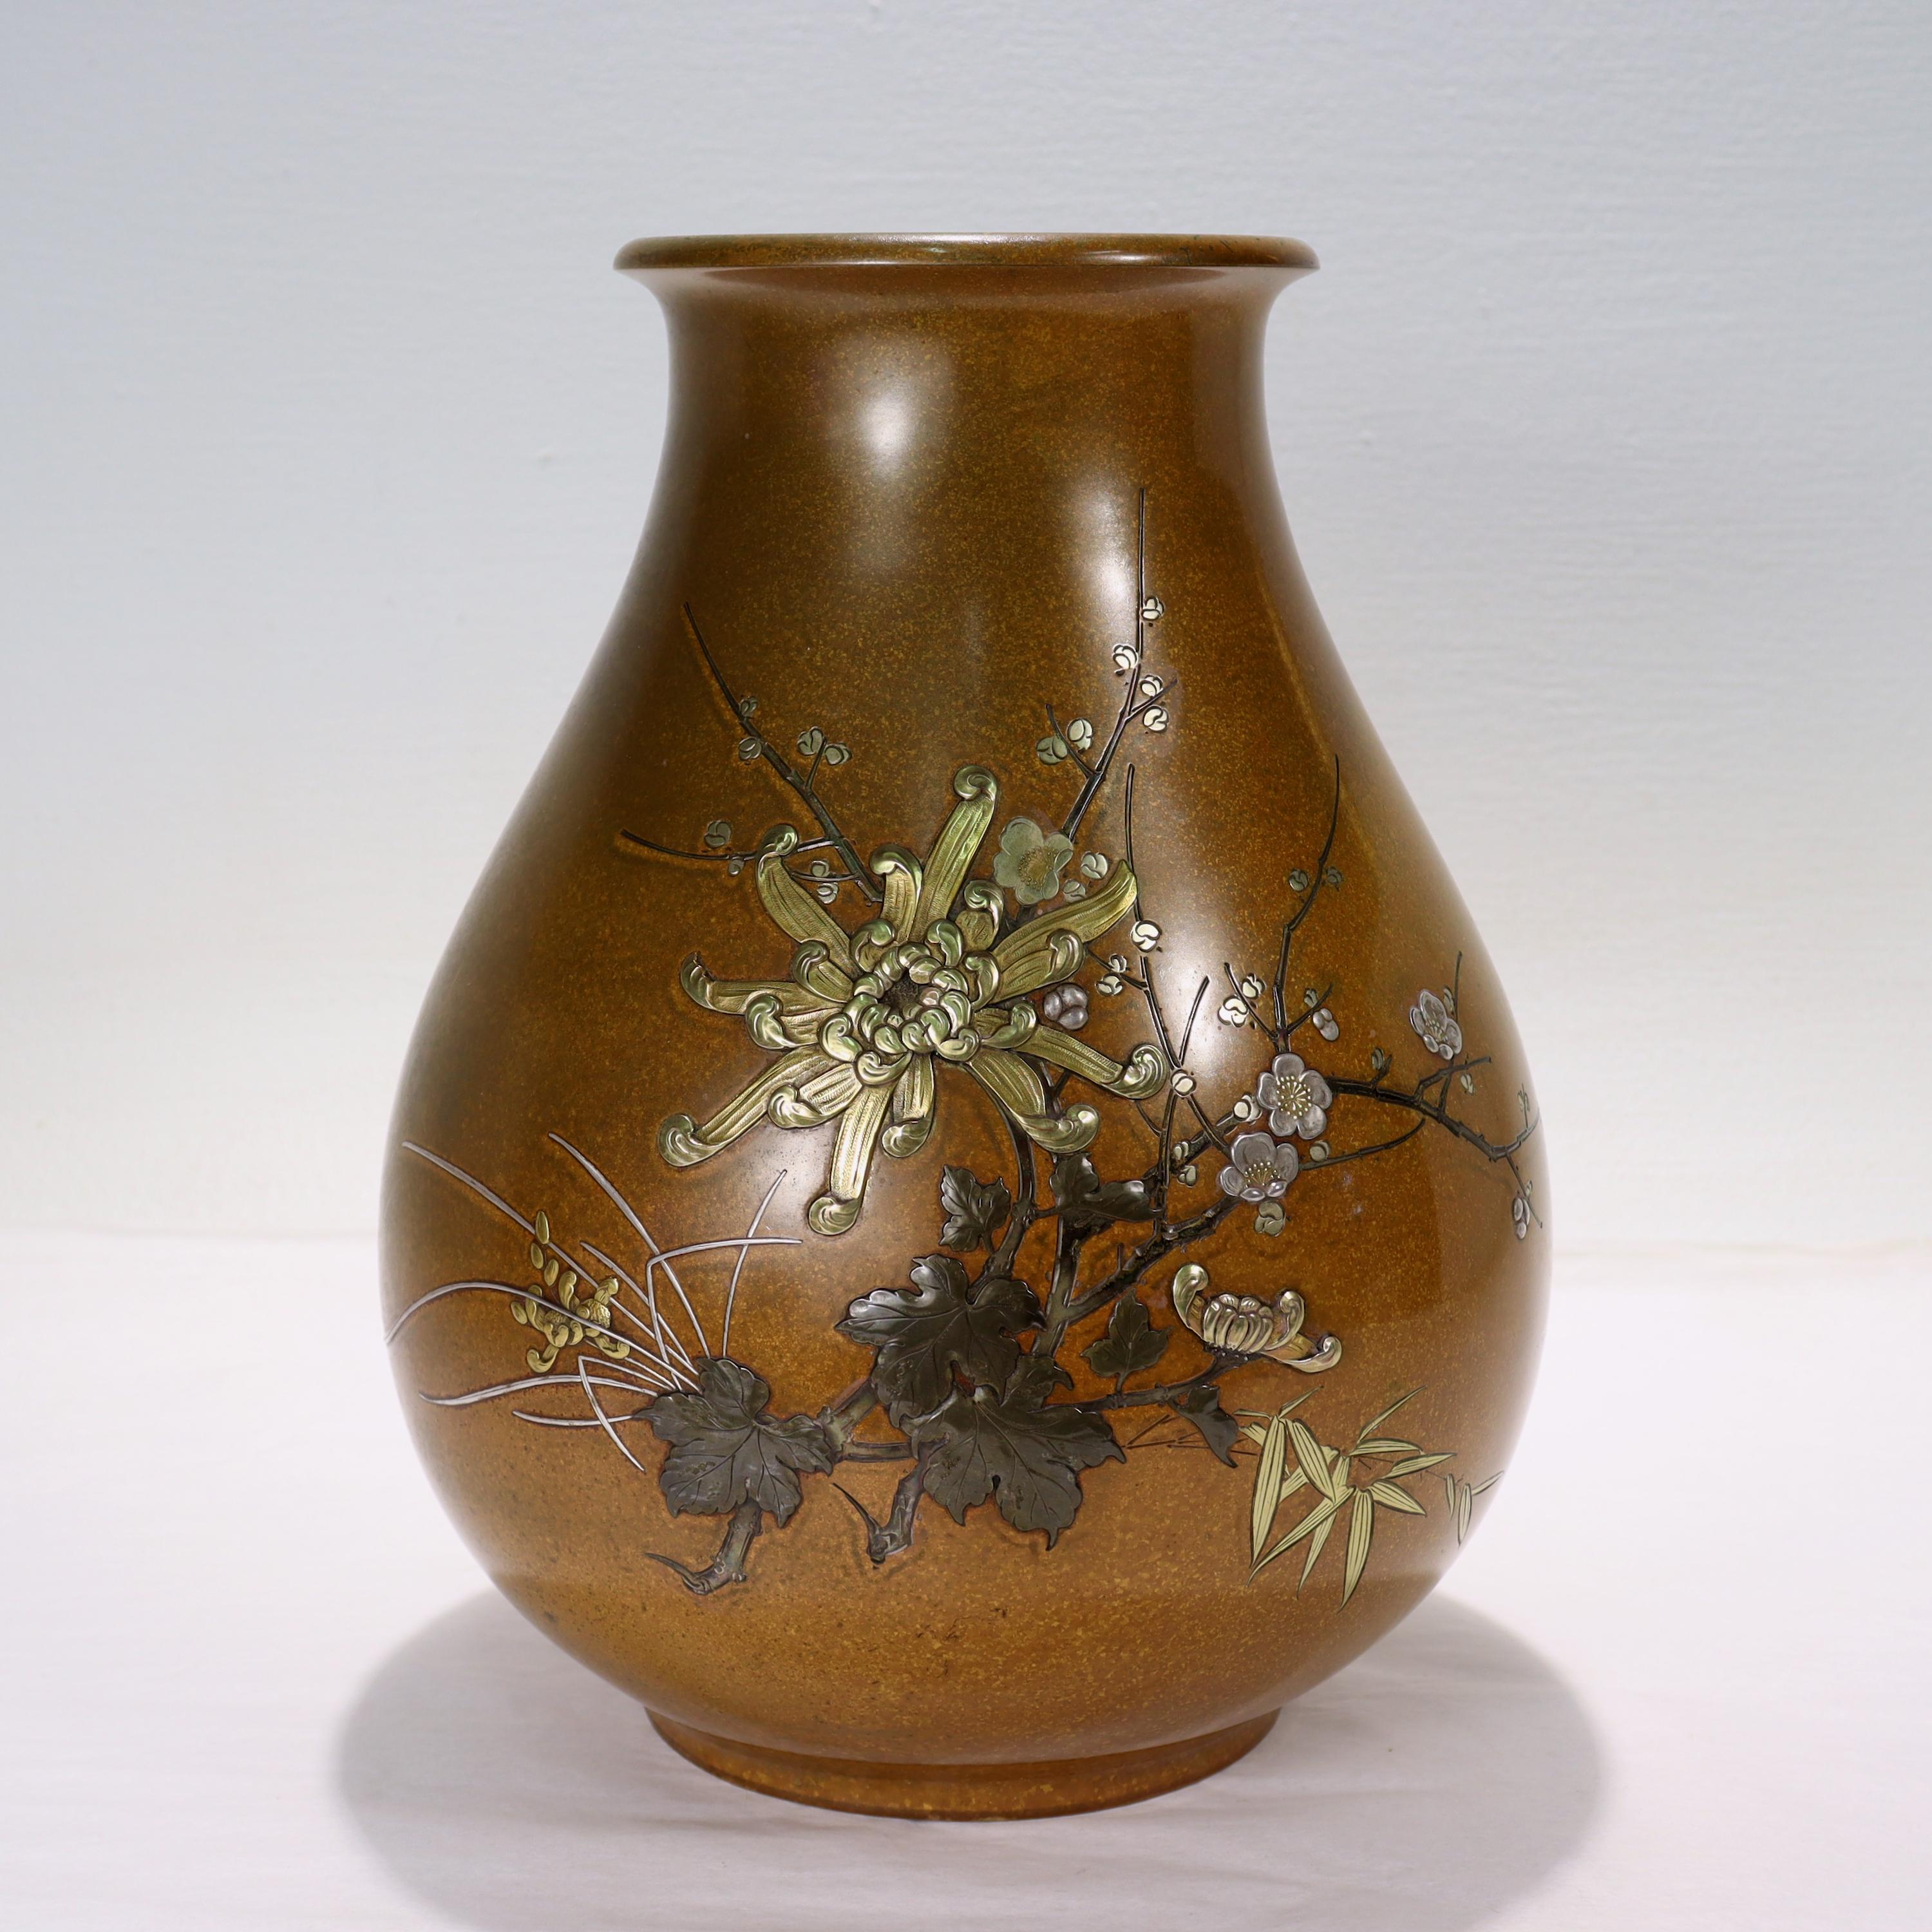 A fine vintage Japanese mixed metals vase.

Decorated throughout with intricate branches and flowers in gold and silver against a 'yellow bronze' ground.

Signed ??? (Made by Houn) on the side, and with a full dedication inscribed to the base.